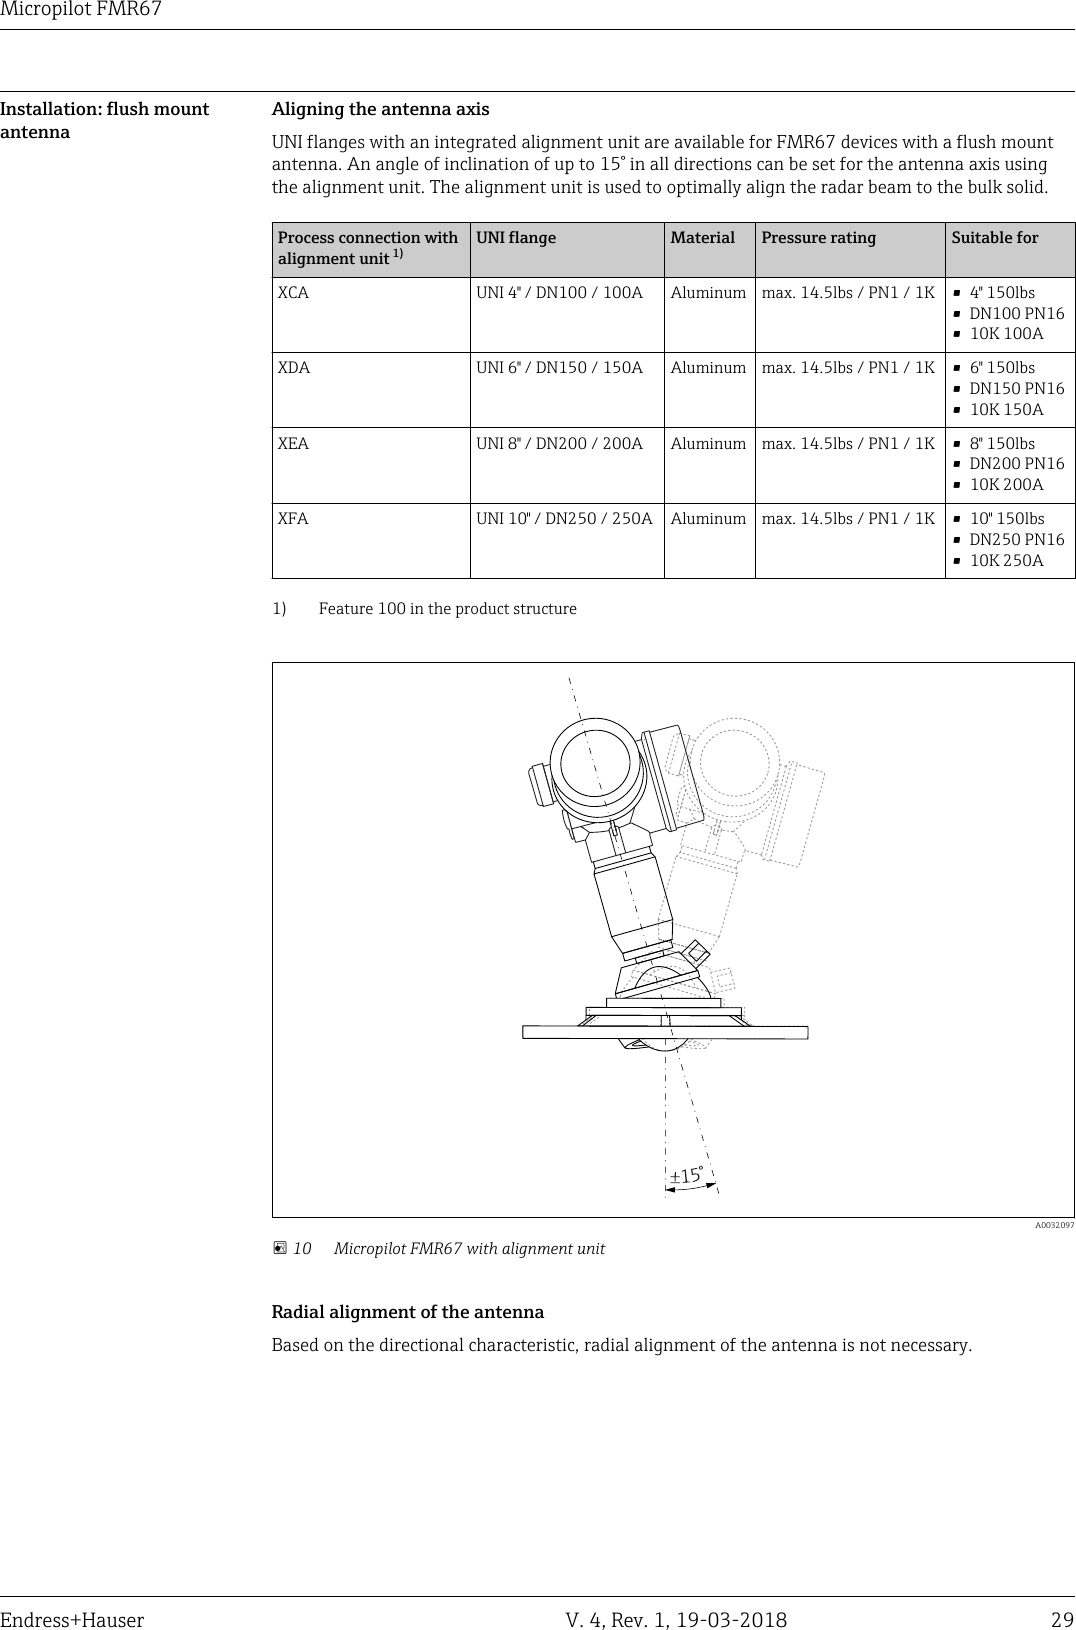 DRAFT DRAFT   DRAFT   DRAFT   DRAFT   DRAFT   DRAFTDRAFT   DRAFT   DRAFTMicropilot FMR67Endress+Hauser V. 4, Rev. 1, 19-03-2018 29Installation: flush mountantennaAligning the antenna axisUNI flanges with an integrated alignment unit are available for FMR67 devices with a flush mountantenna. An angle of inclination of up to 15° in all directions can be set for the antenna axis usingthe alignment unit. The alignment unit is used to optimally align the radar beam to the bulk solid.Process connection withalignment unit 1) UNI flange Material Pressure rating Suitable forXCA UNI 4&quot; / DN100 / 100A Aluminum max. 14.5lbs / PN1 / 1K • 4&quot; 150lbs• DN100 PN16• 10K 100AXDA UNI 6&quot; / DN150 / 150A Aluminum max. 14.5lbs / PN1 / 1K • 6&quot; 150lbs• DN150 PN16• 10K 150AXEA UNI 8&quot; / DN200 / 200A Aluminum max. 14.5lbs / PN1 / 1K • 8&quot; 150lbs• DN200 PN16• 10K 200AXFA UNI 10&quot; / DN250 / 250A Aluminum max. 14.5lbs / PN1 / 1K • 10&quot; 150lbs• DN250 PN16• 10K 250A1) Feature 100 in the product structure  A0032097 10 Micropilot FMR67 with alignment unitRadial alignment of the antennaBased on the directional characteristic, radial alignment of the antenna is not necessary.